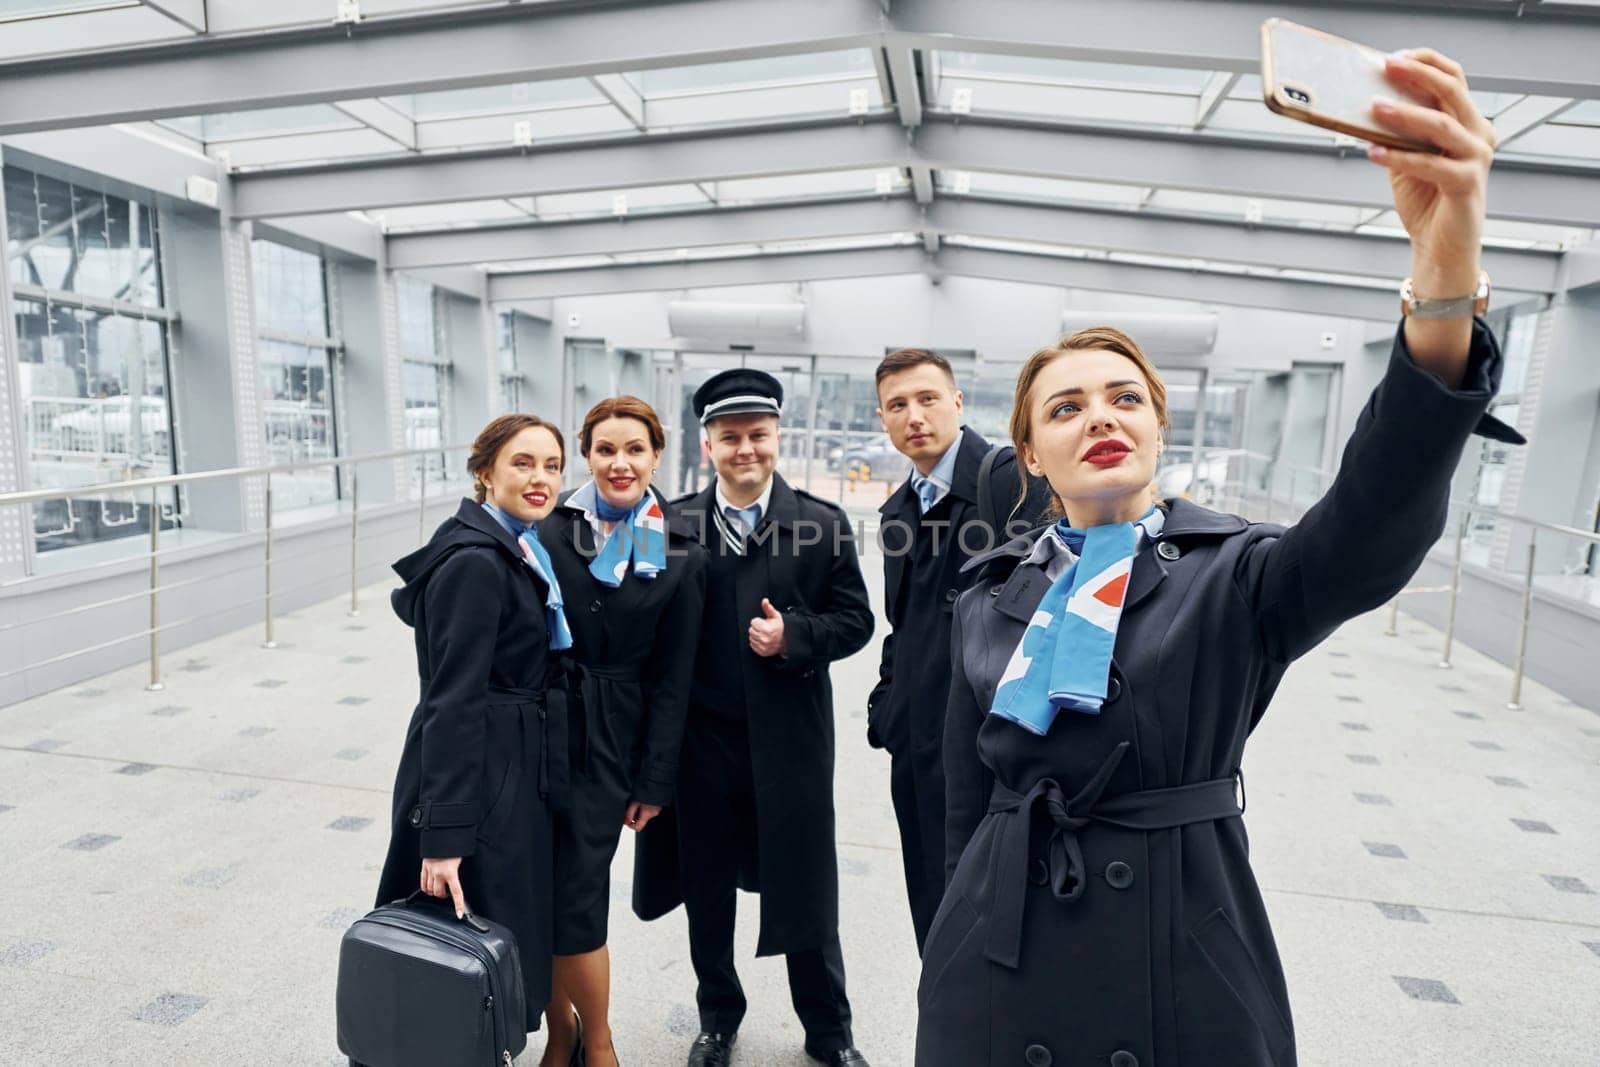 Doing selfie. Airplane crew in uniform is going to the work together by Standret